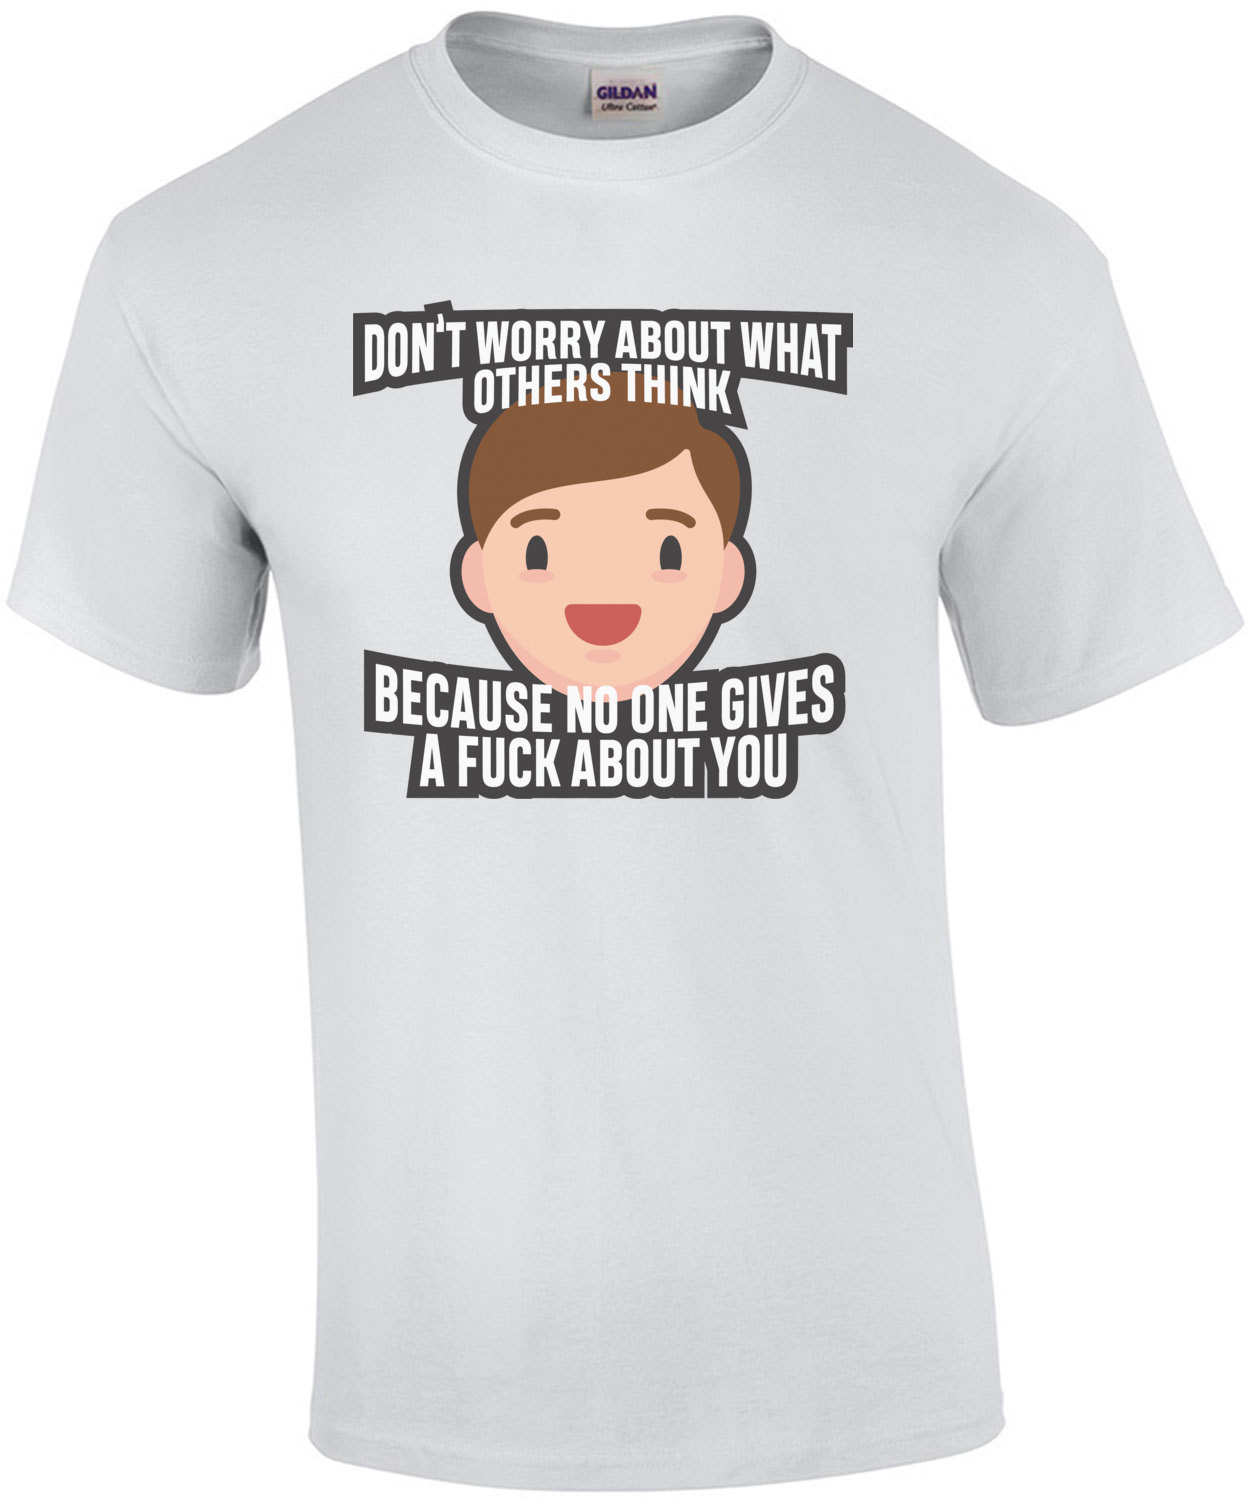 Don't worry about what others think - because no one gives a fuck about you. funny t-shirt